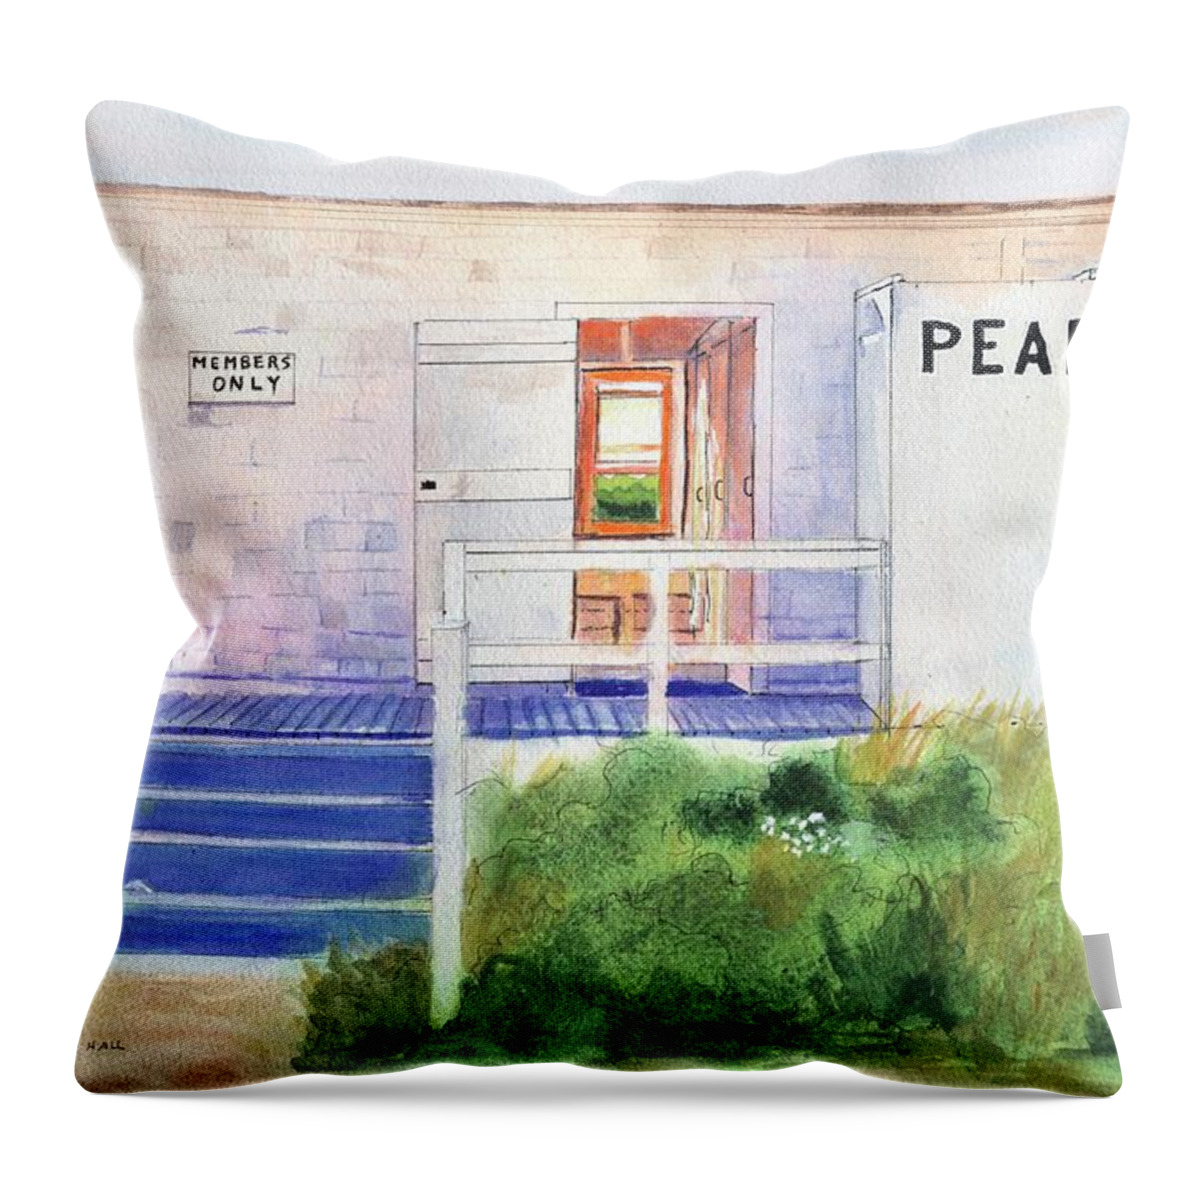 Peabody Beach Throw Pillow featuring the painting Peabodys Beach Middletown RI by Patty Kay Hall